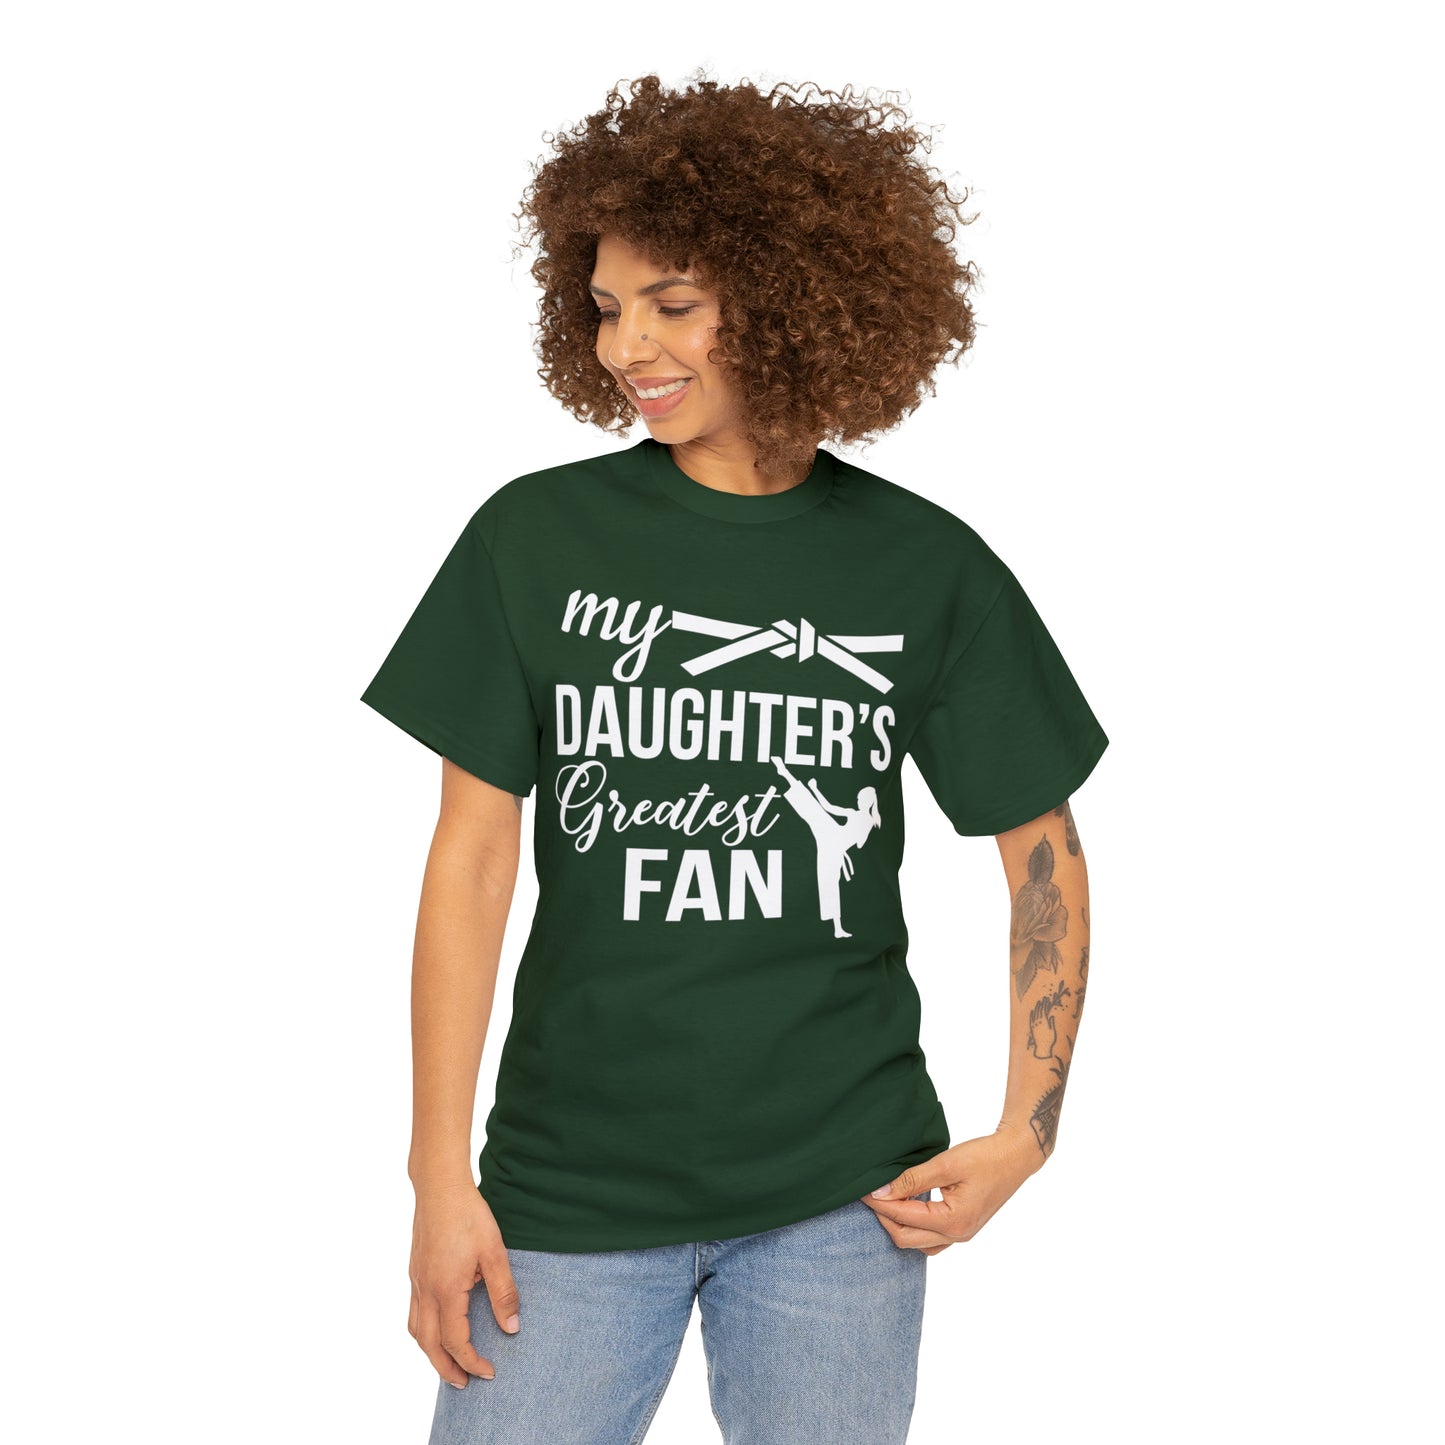 My Daughter's Greatest Fan! Shirt For Moms or Dads Heavy Cotton Tee